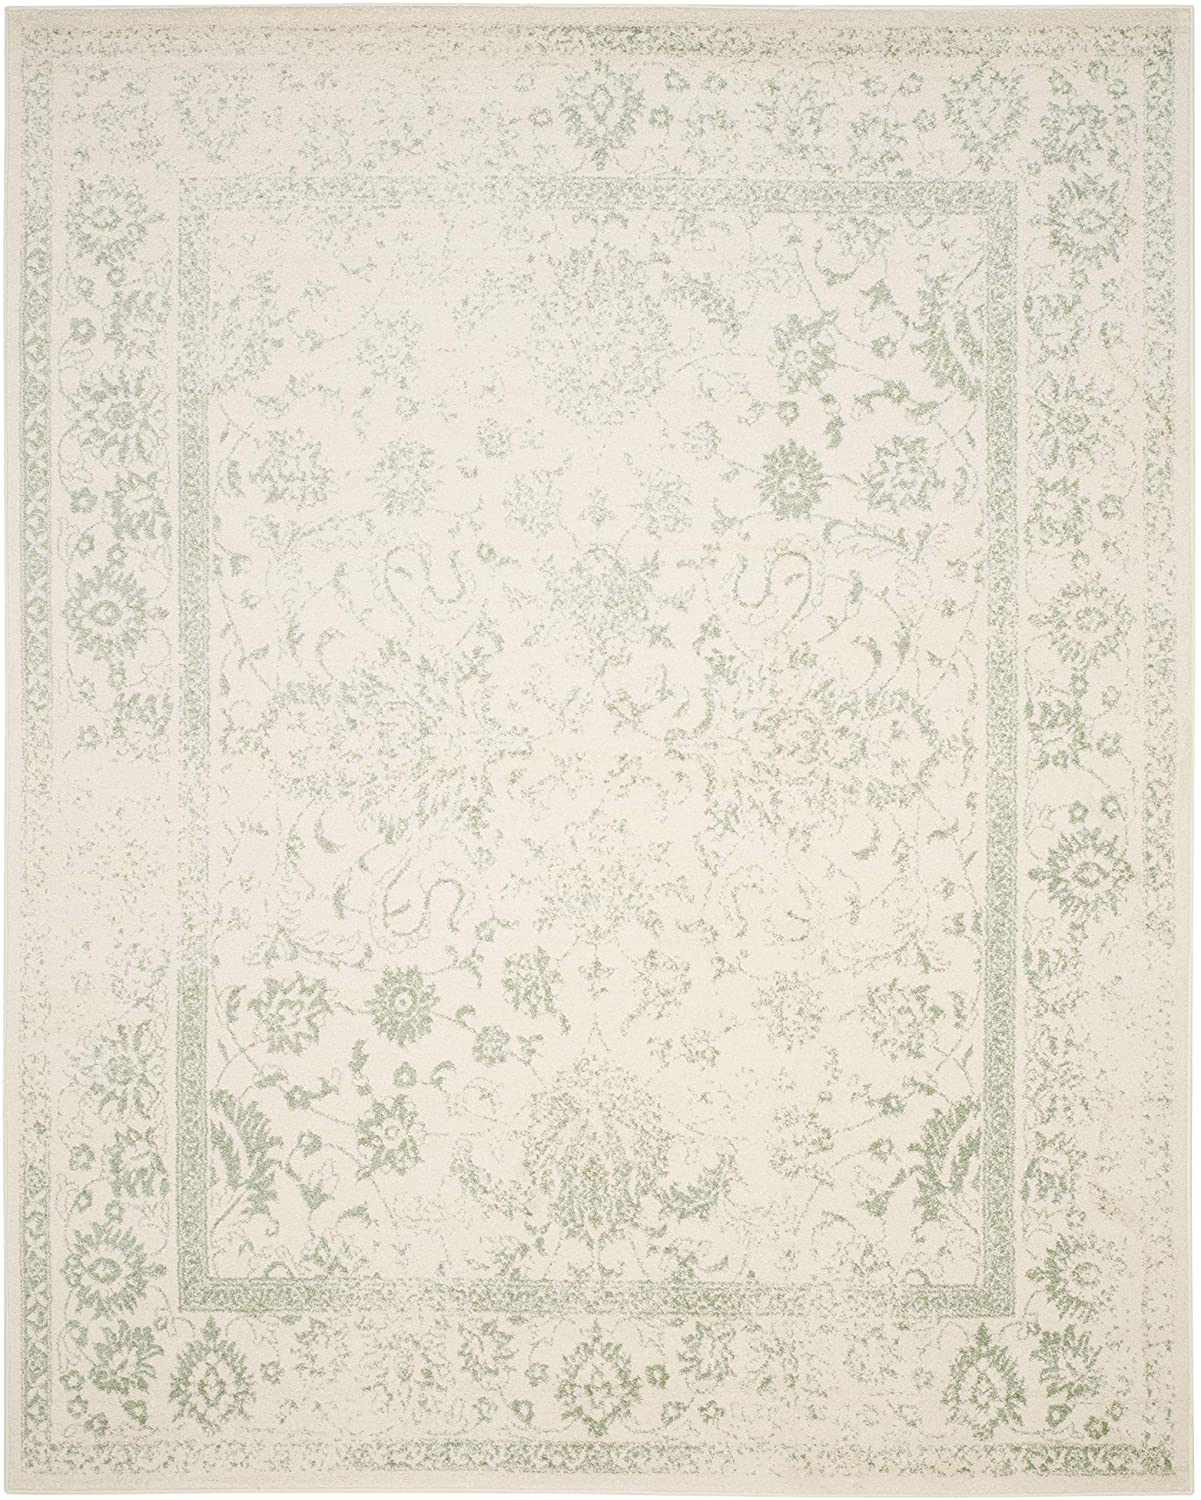 Safavieh Adirondack Collection ADR109C Oriental Distressed Non-Shedding Stain Resistant Living Room Bedroom Area Rug, 3' x 5', Ivory / Silver